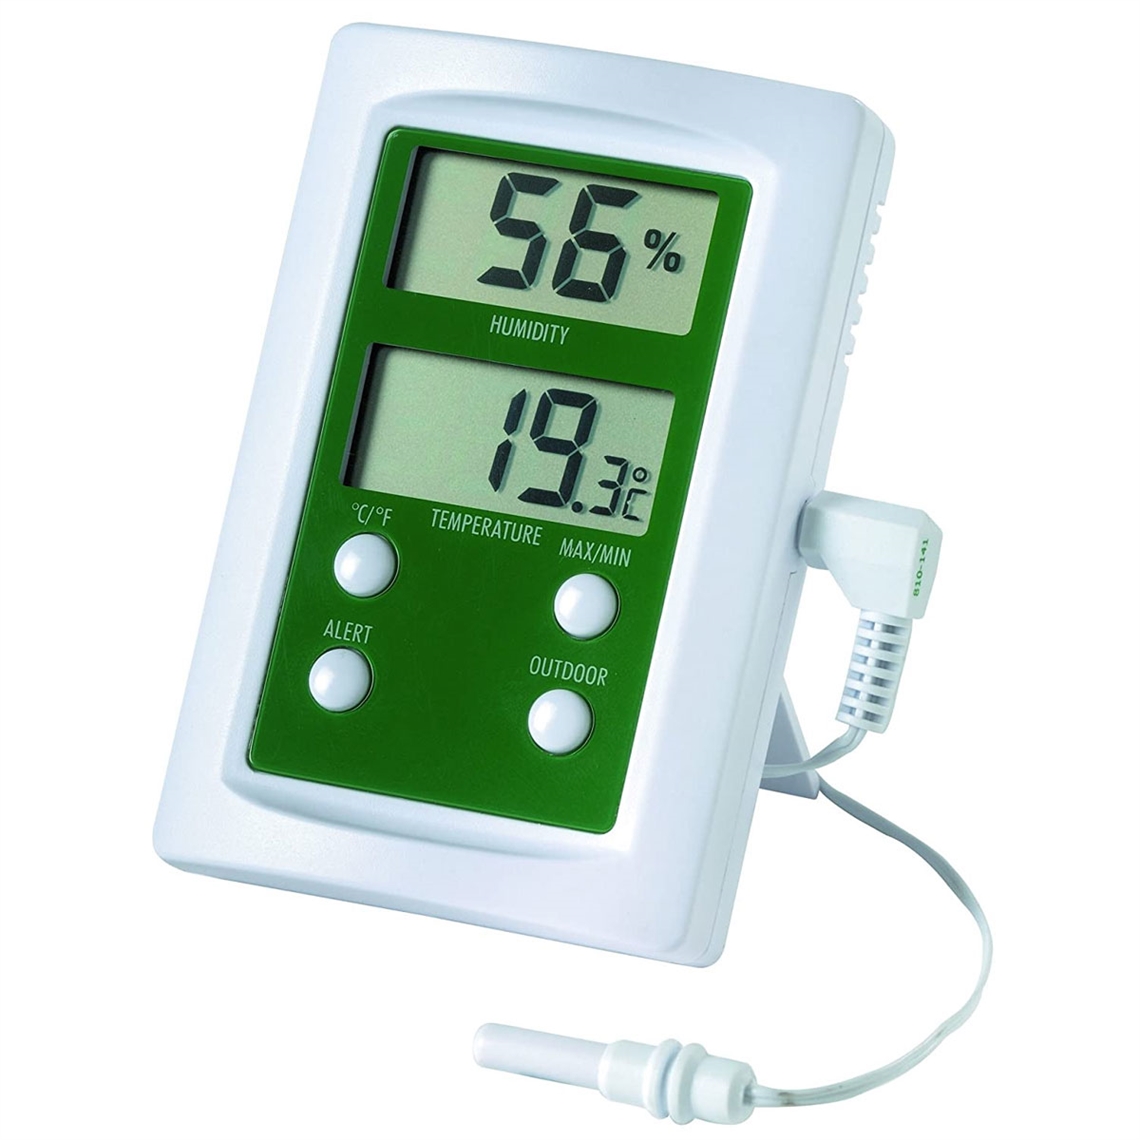 View more pulltex from our Thermo Hygrometers range